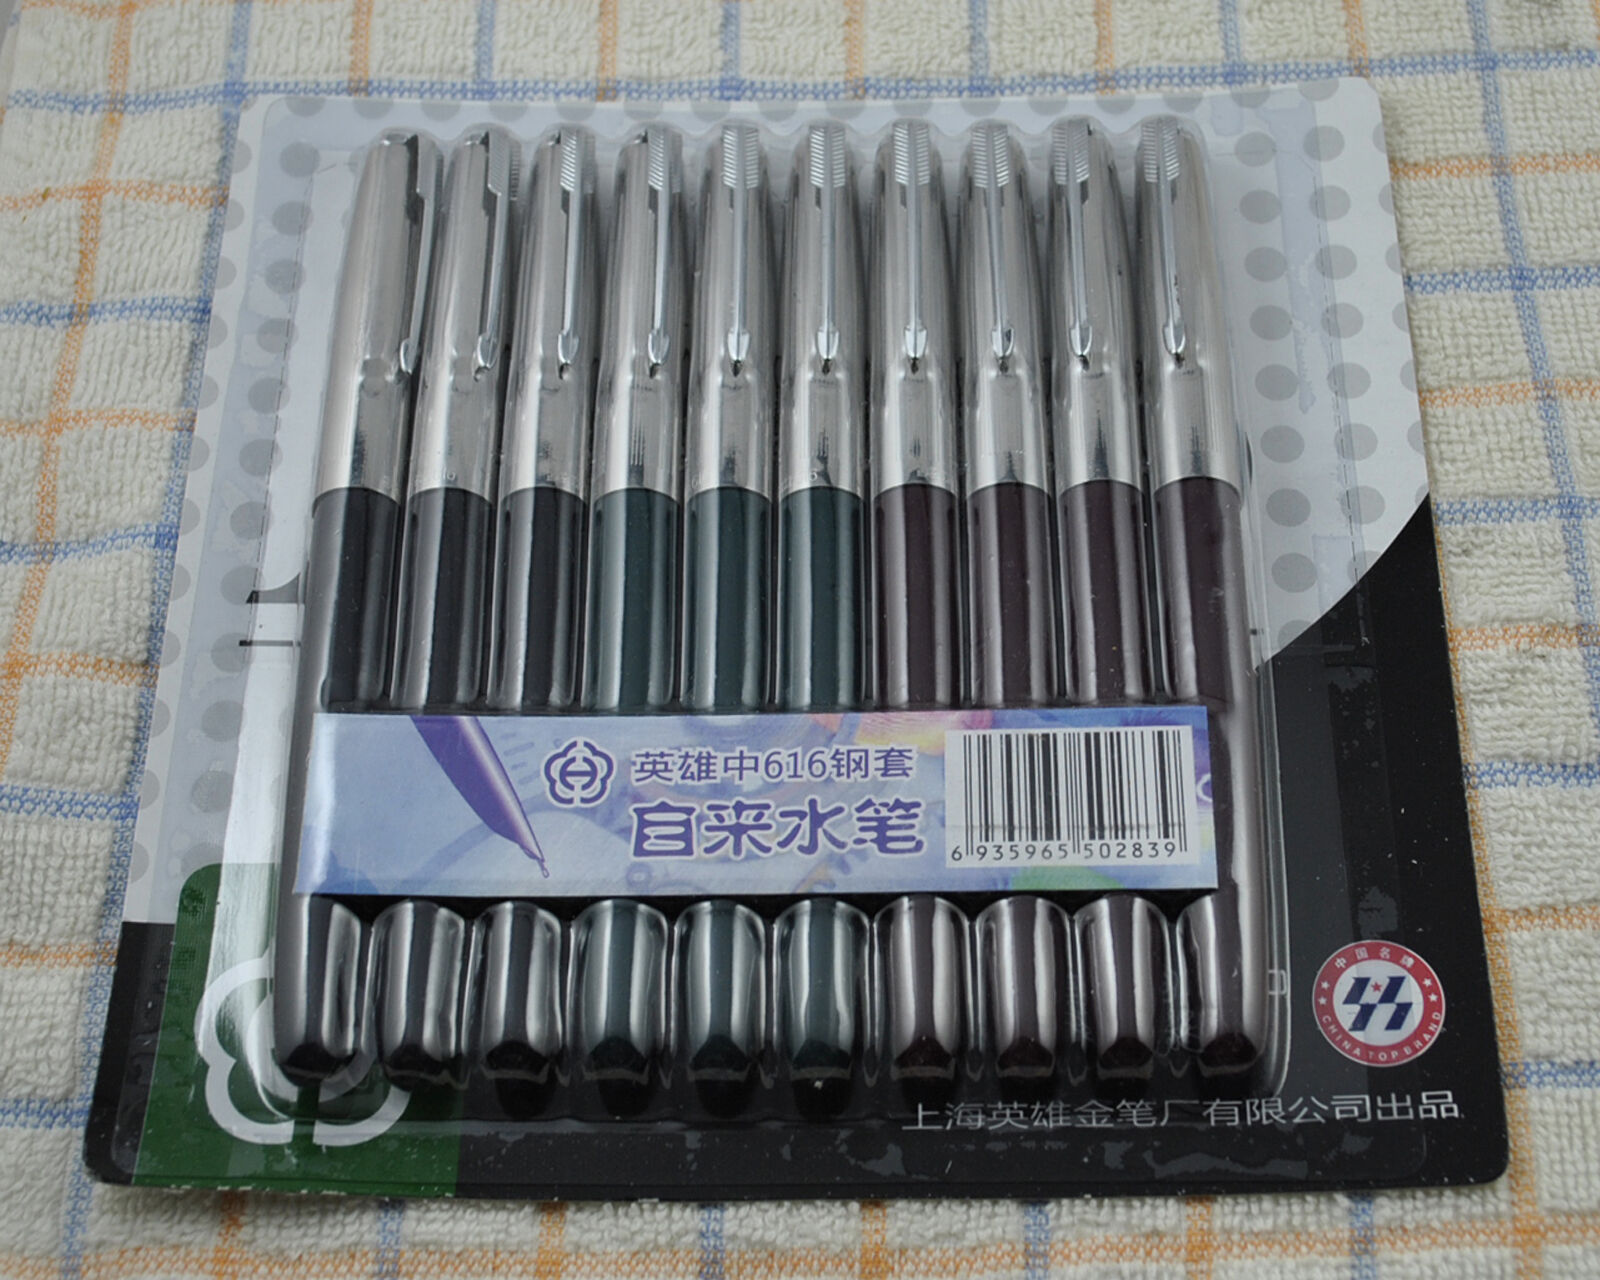 One Pack of Hero 616 Big Size Fountain Pen 10 Pens